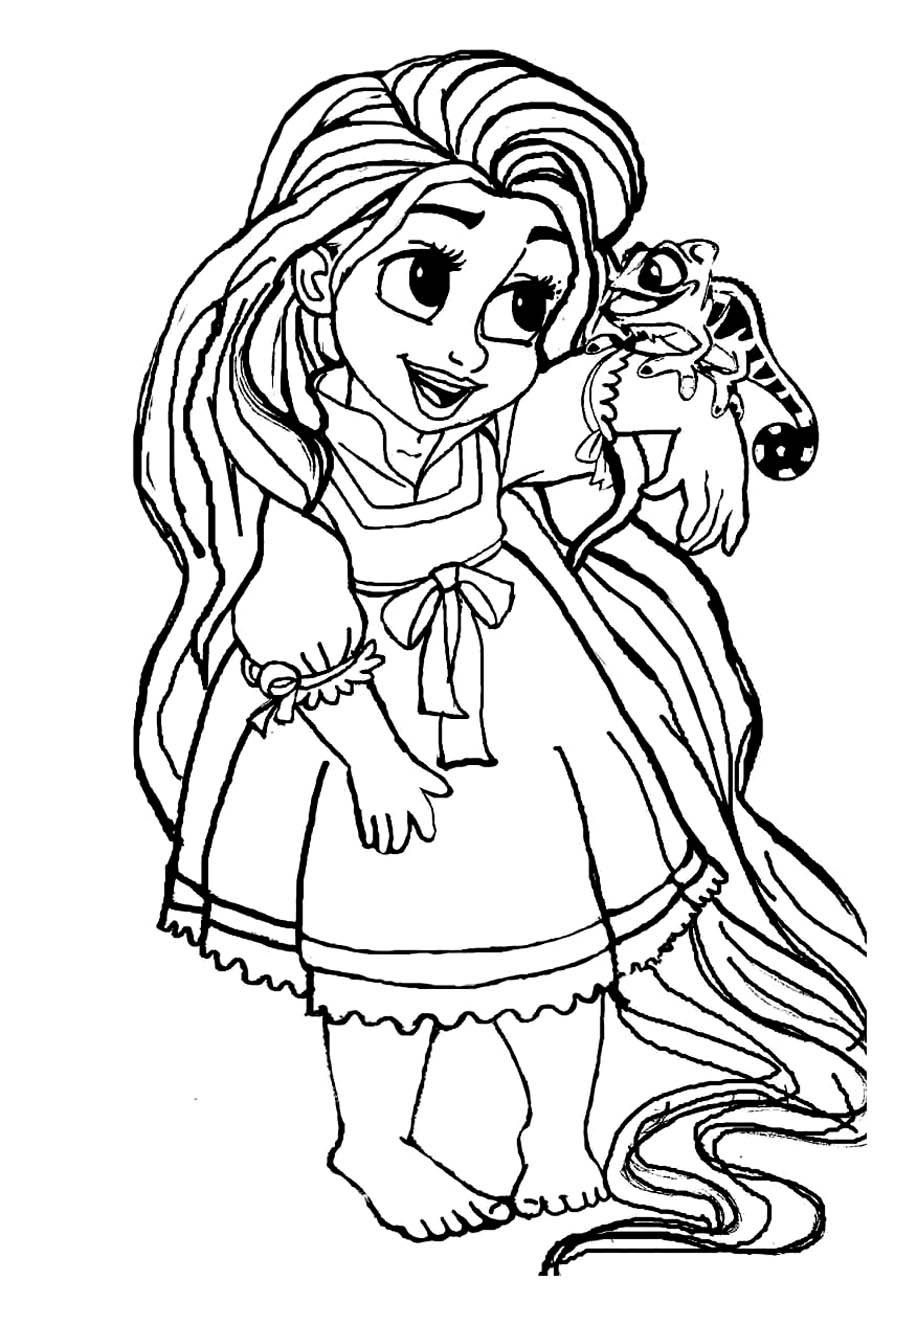 Tangled to print for free Tangled Kids Coloring Pages